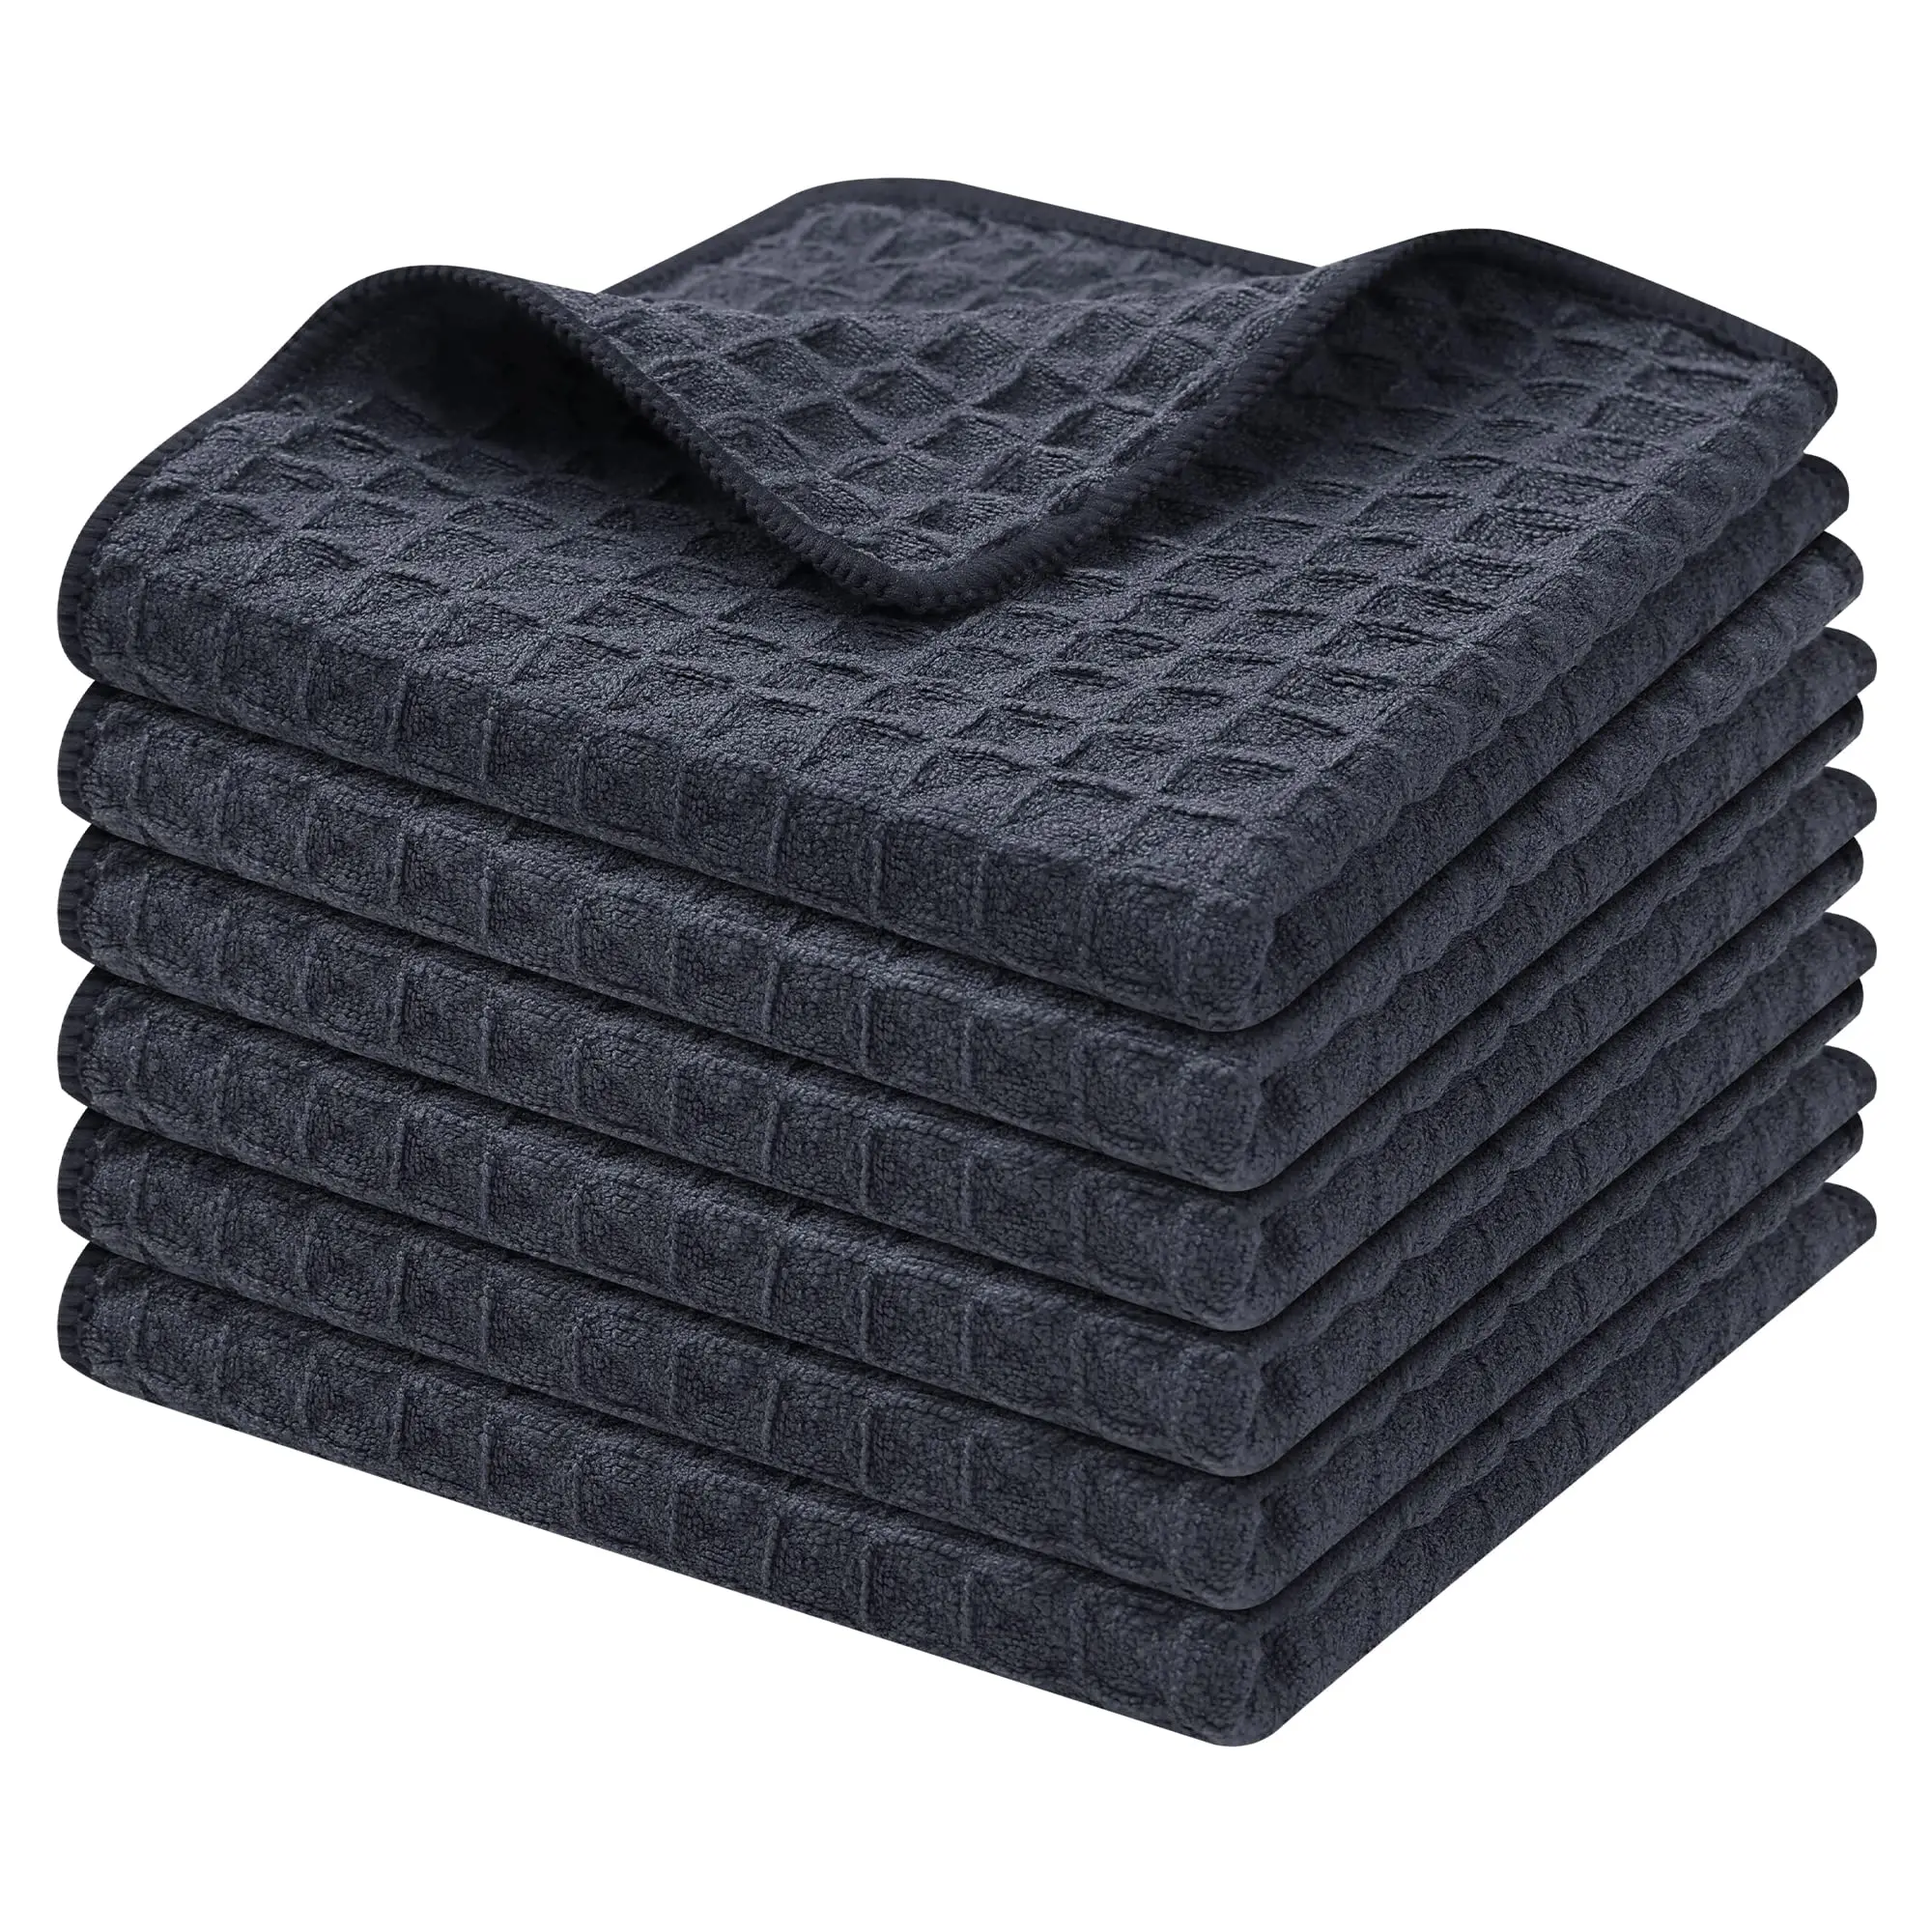 

Homaxy 2pcs Microfiber Kitchen Towel Waffle Weave Dishcloth Absorbent Kitchen Cloths Fast Drying Scouring Pad Cleaning Tools